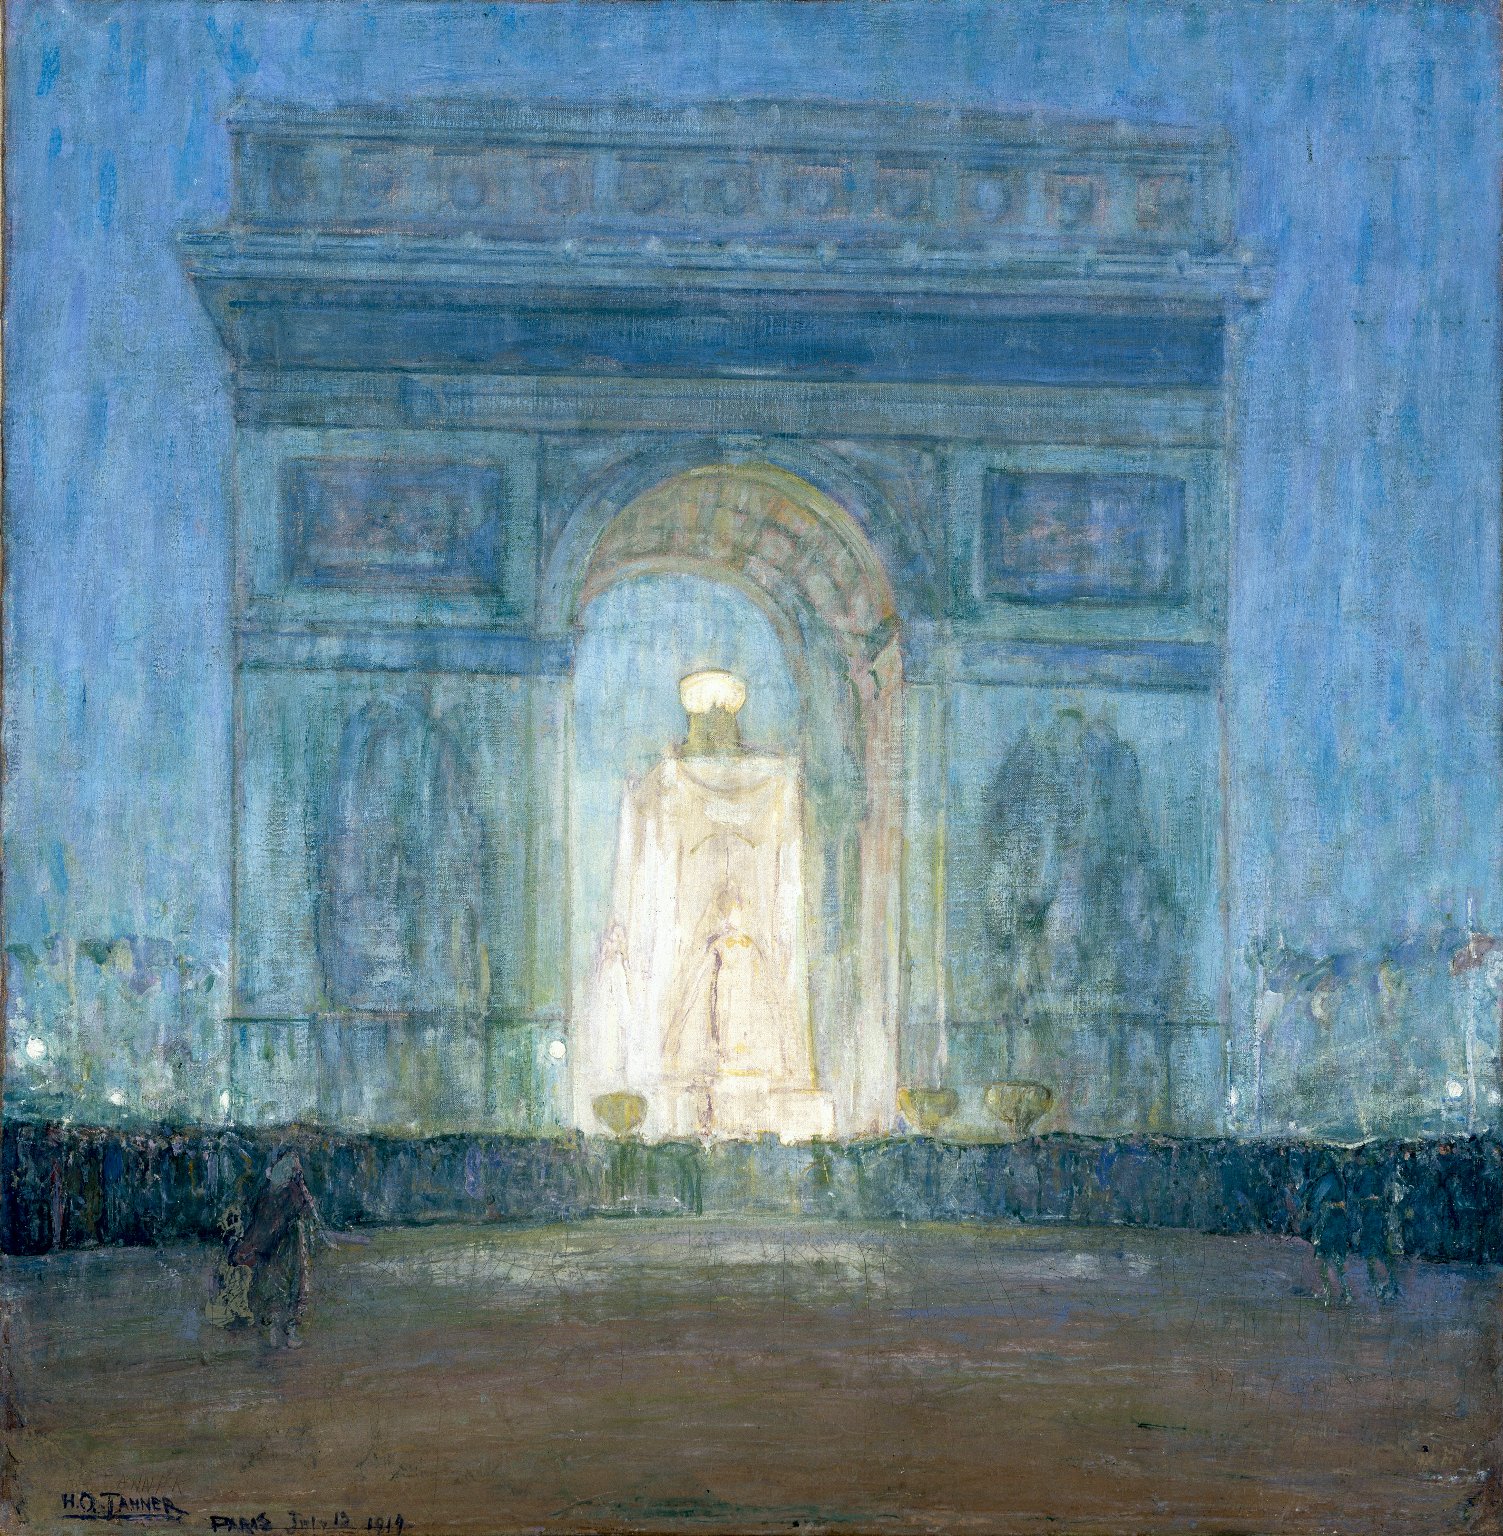 The Arch by Henry Ossawa Tanner - 1919 - 99.7 x 97 cm Brooklyn Museum